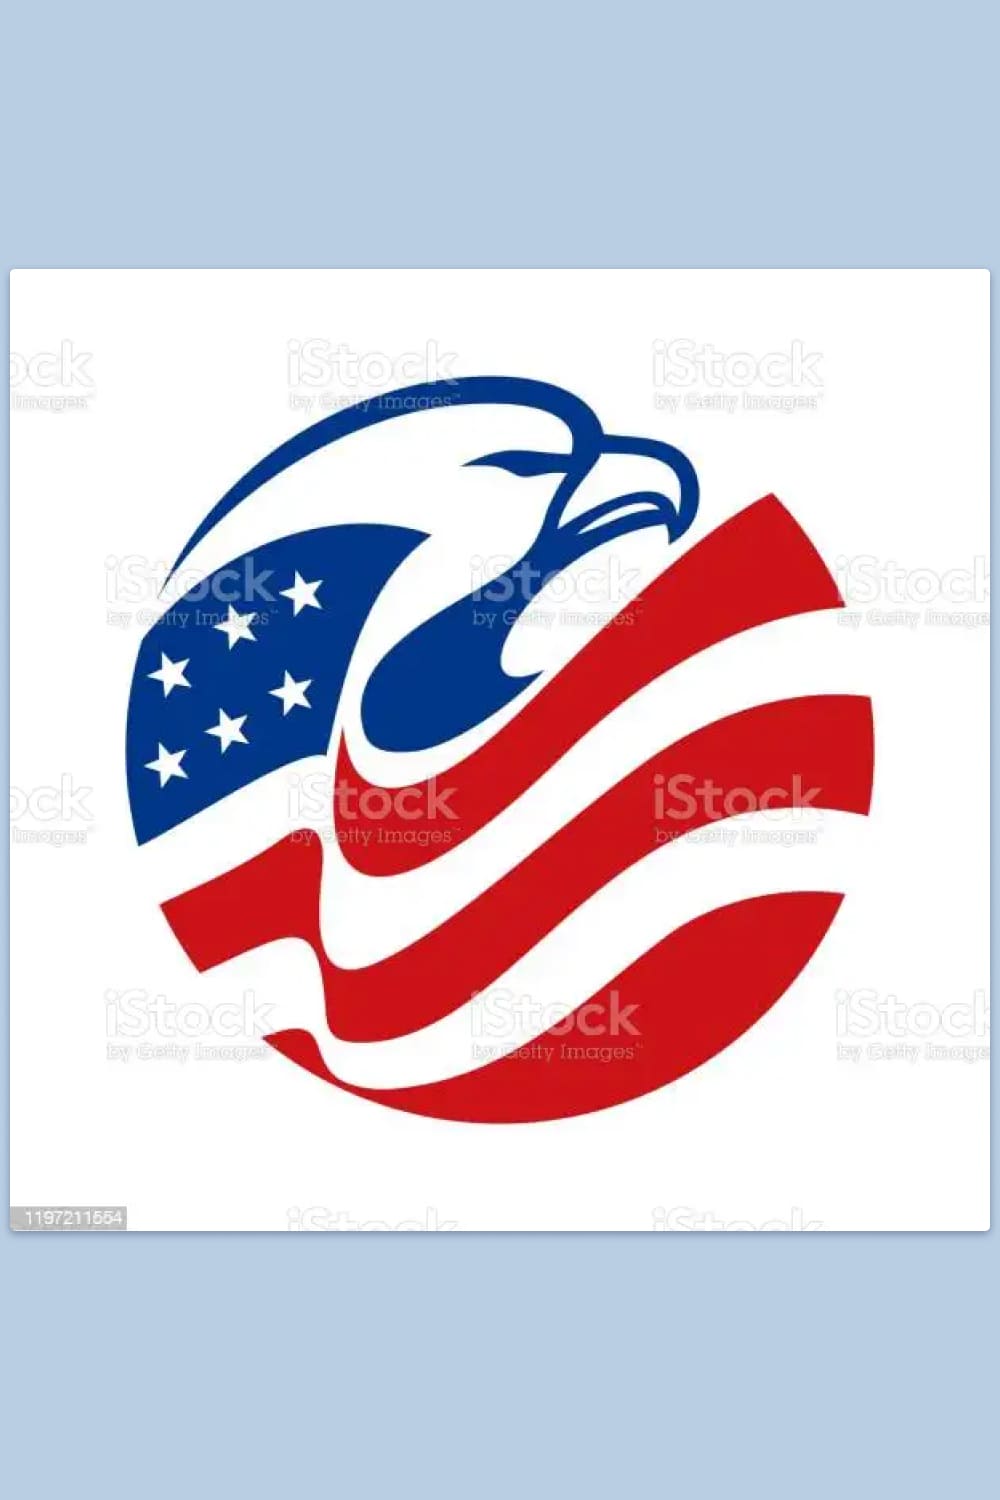 Stylishly designed American flag in form of the eagle.